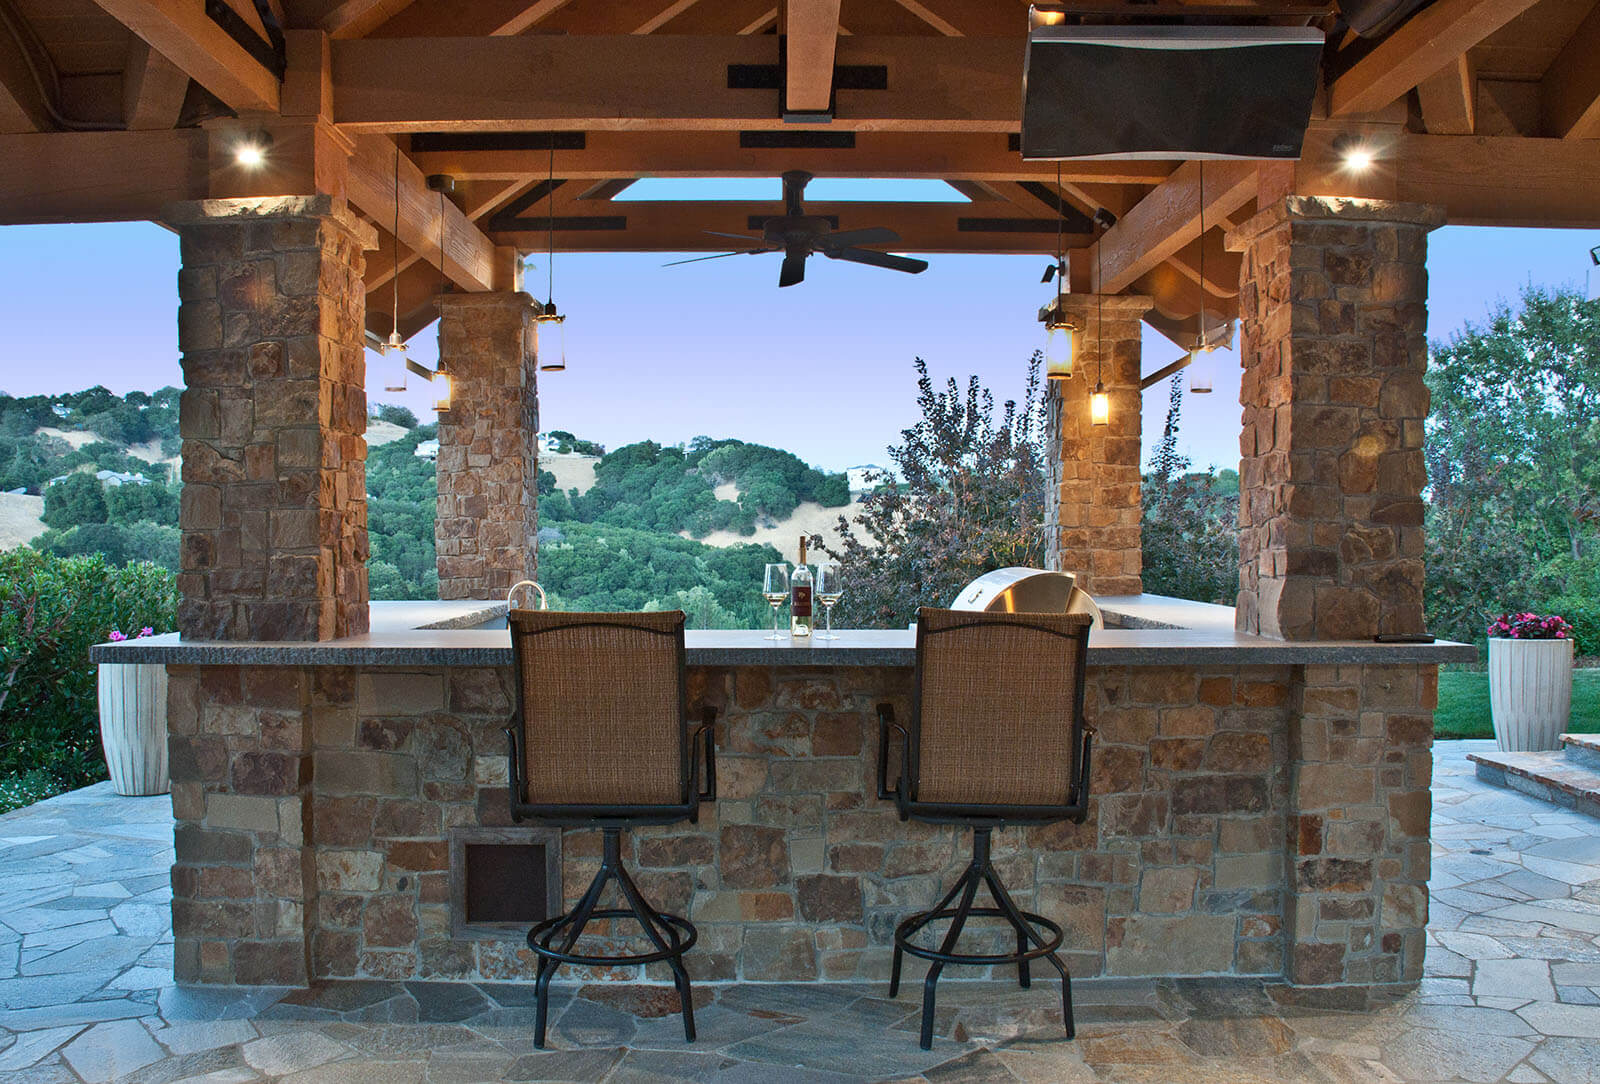 Wood pavilion-covered outdoor bar and grill with stone accents and view of California hills